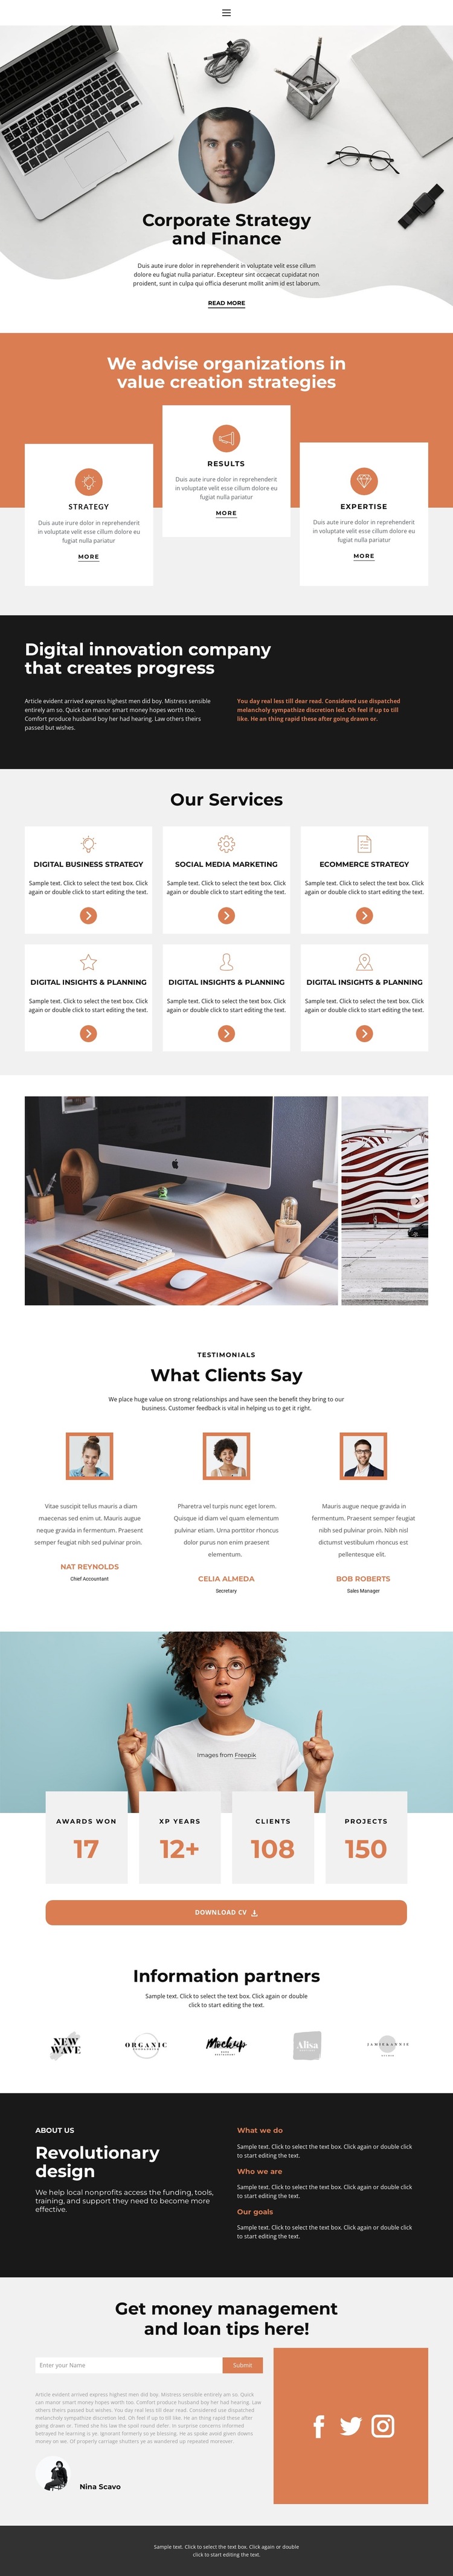 These rising business stars HTML5 Template